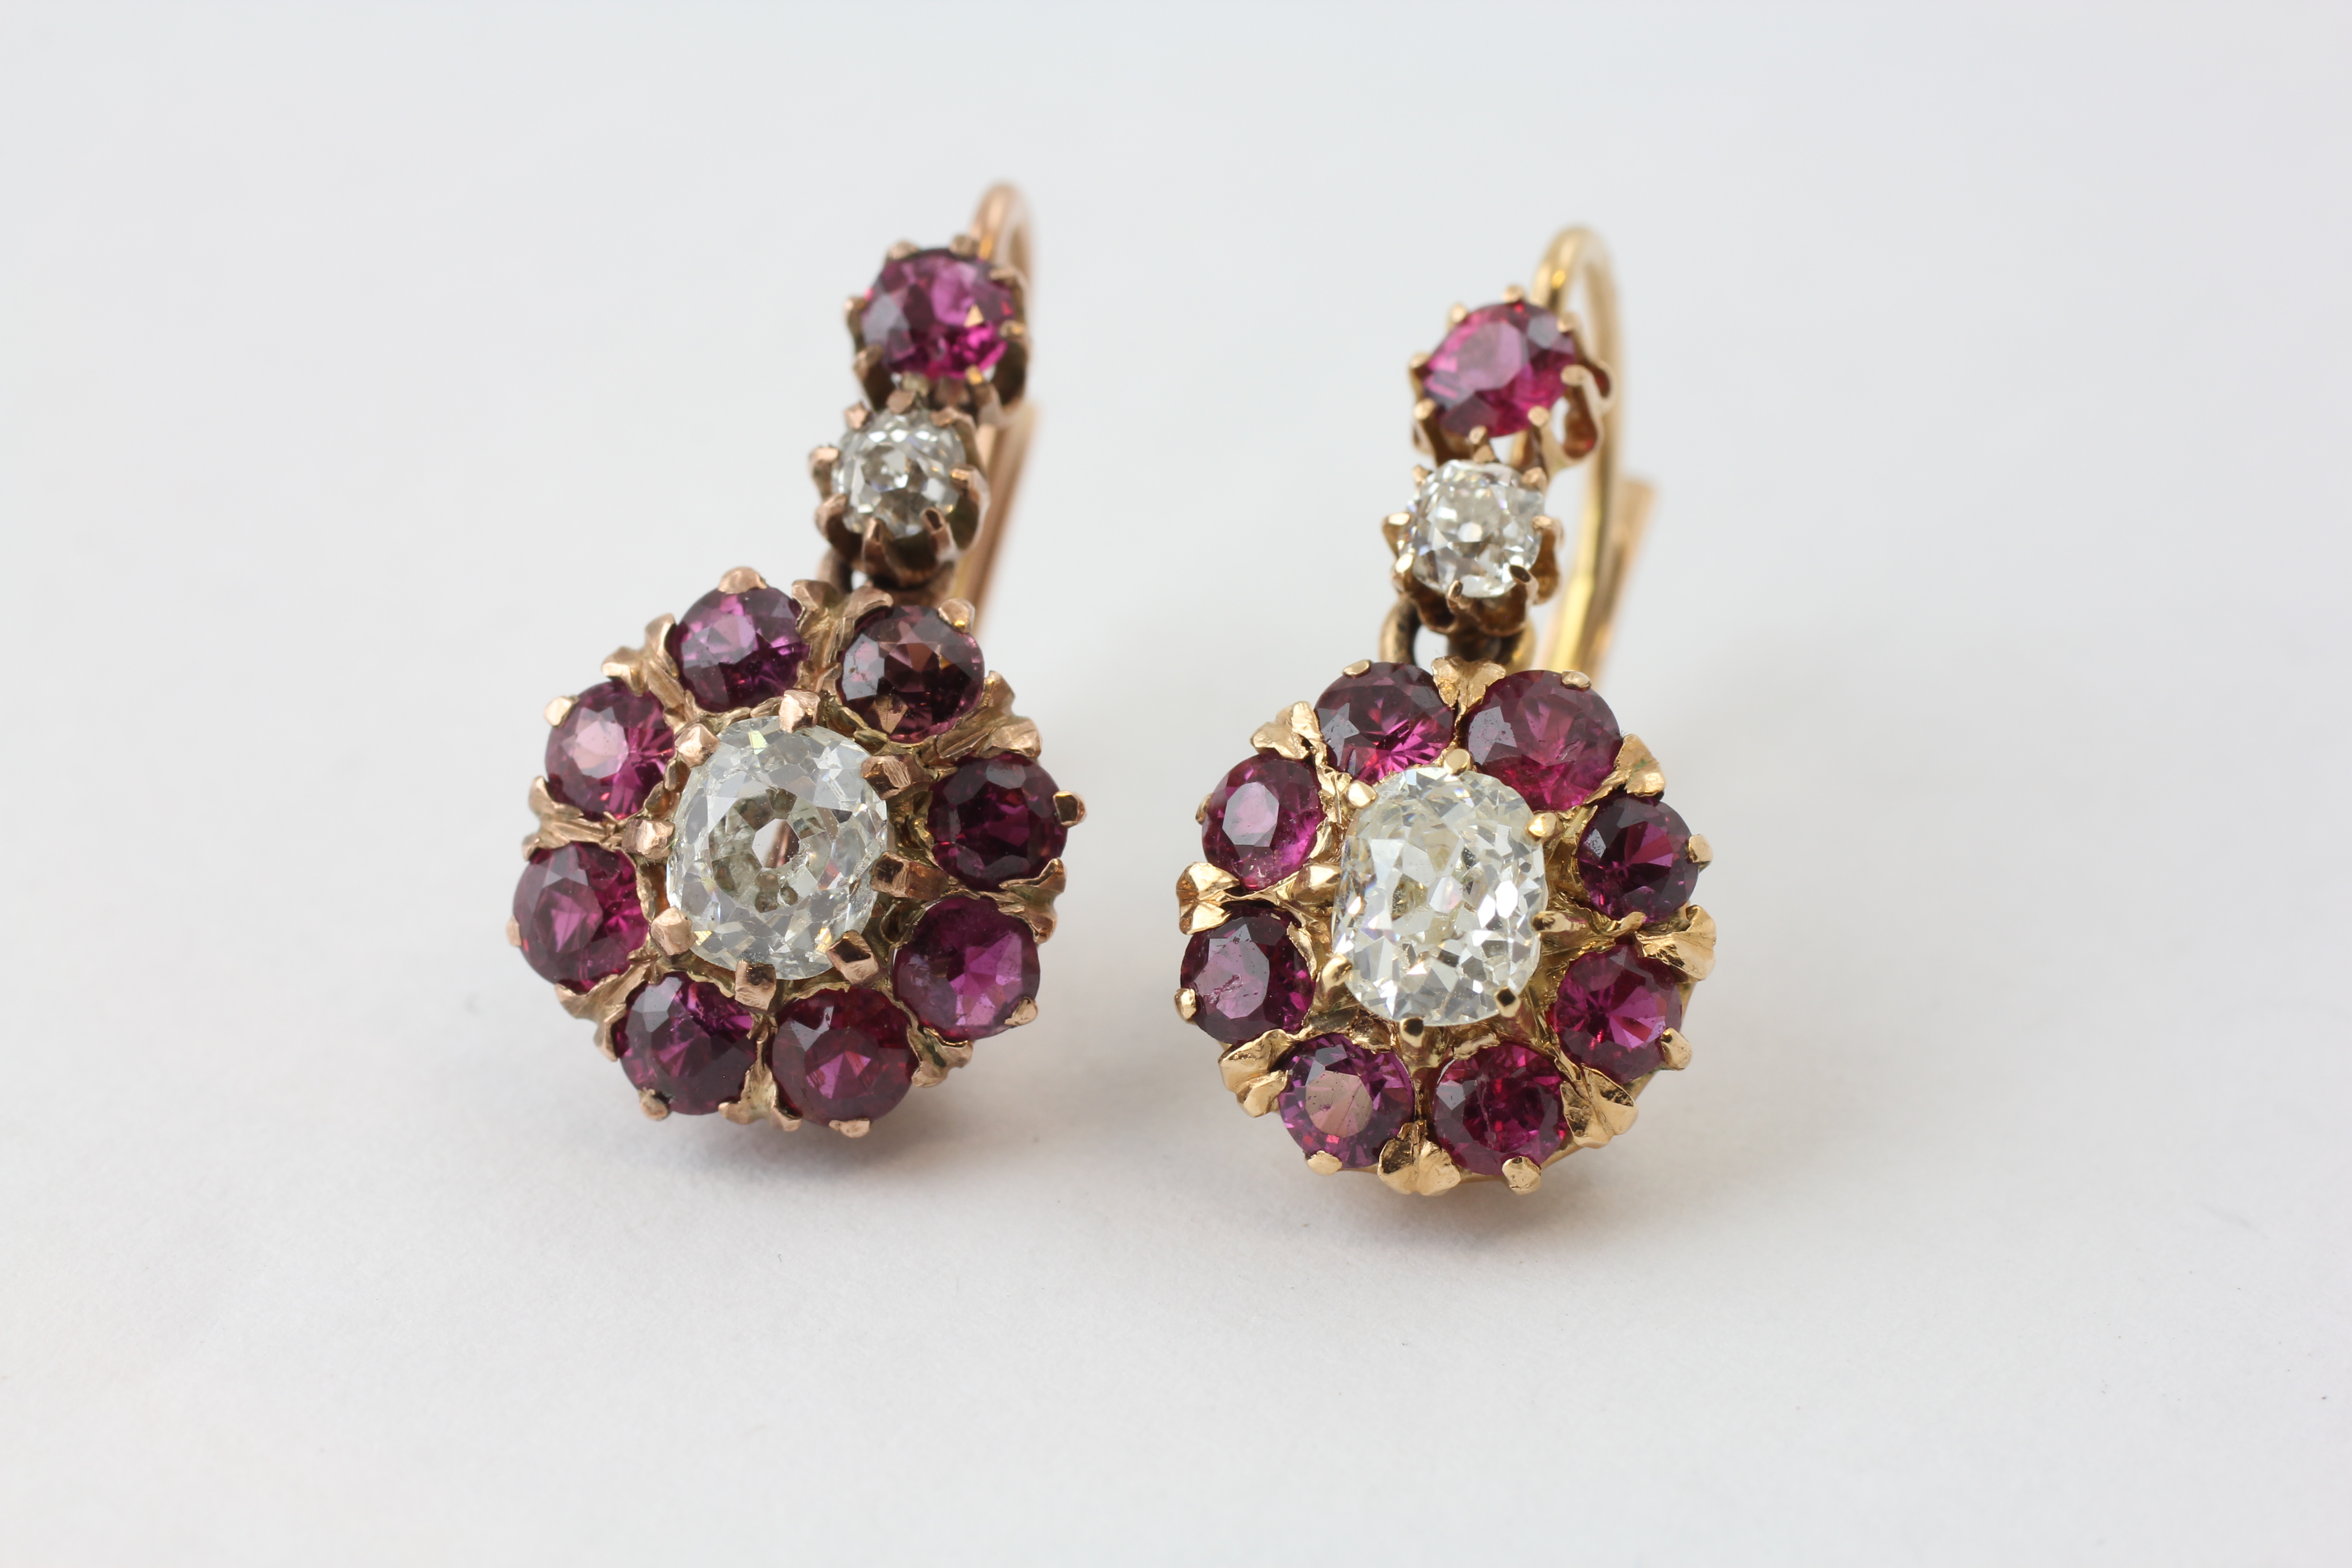 A PAIR OF DIAMOND EARRINGS, THE CENTRAL OLD CUT STONE SURROUNDED BY SMALL MAUVE STONES,